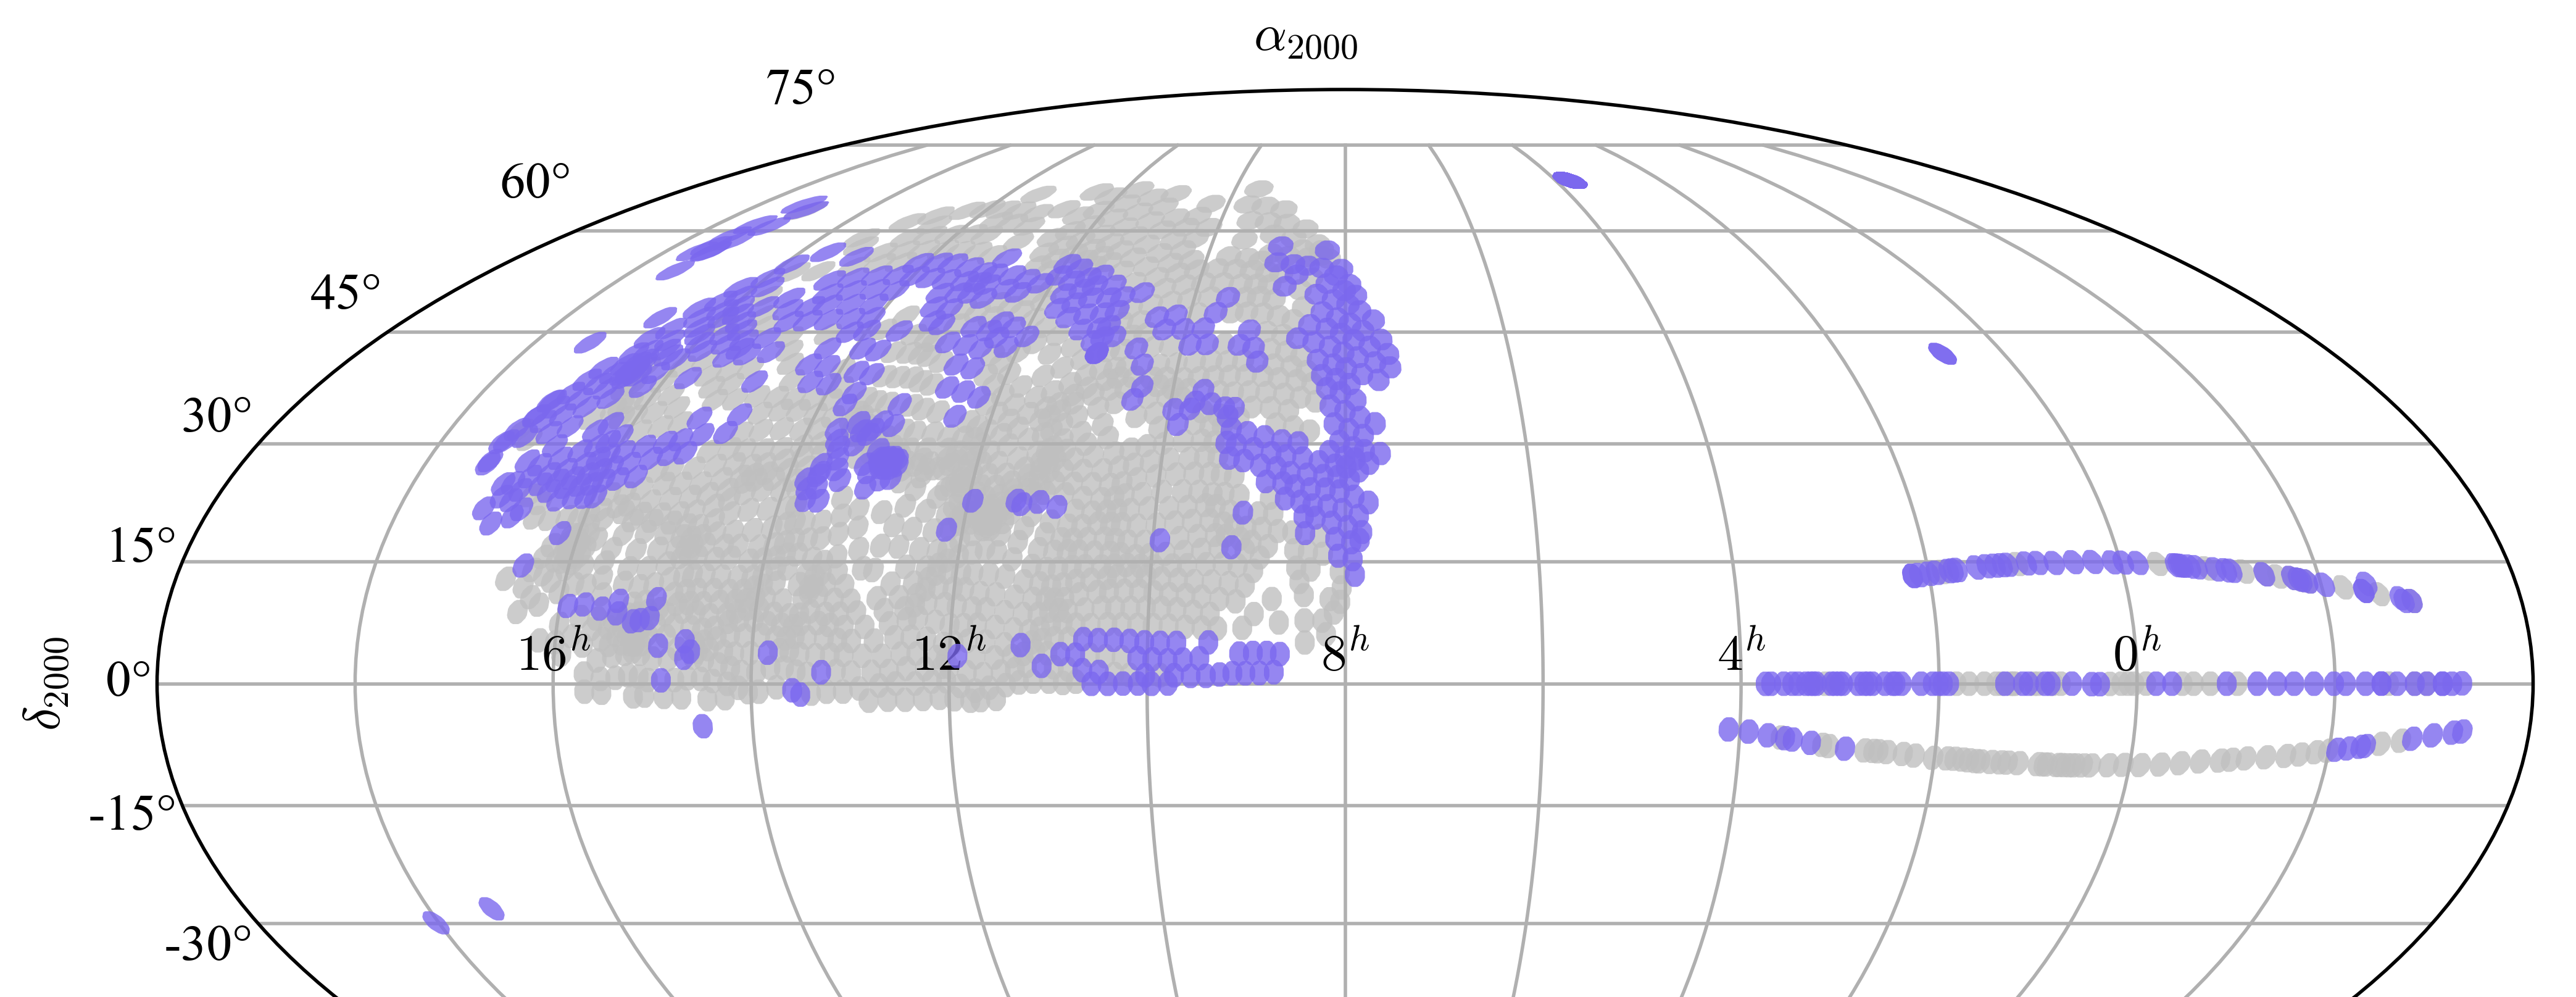 DR17 MaNGA spectroscopic coverage: observed plates are shown in blue.